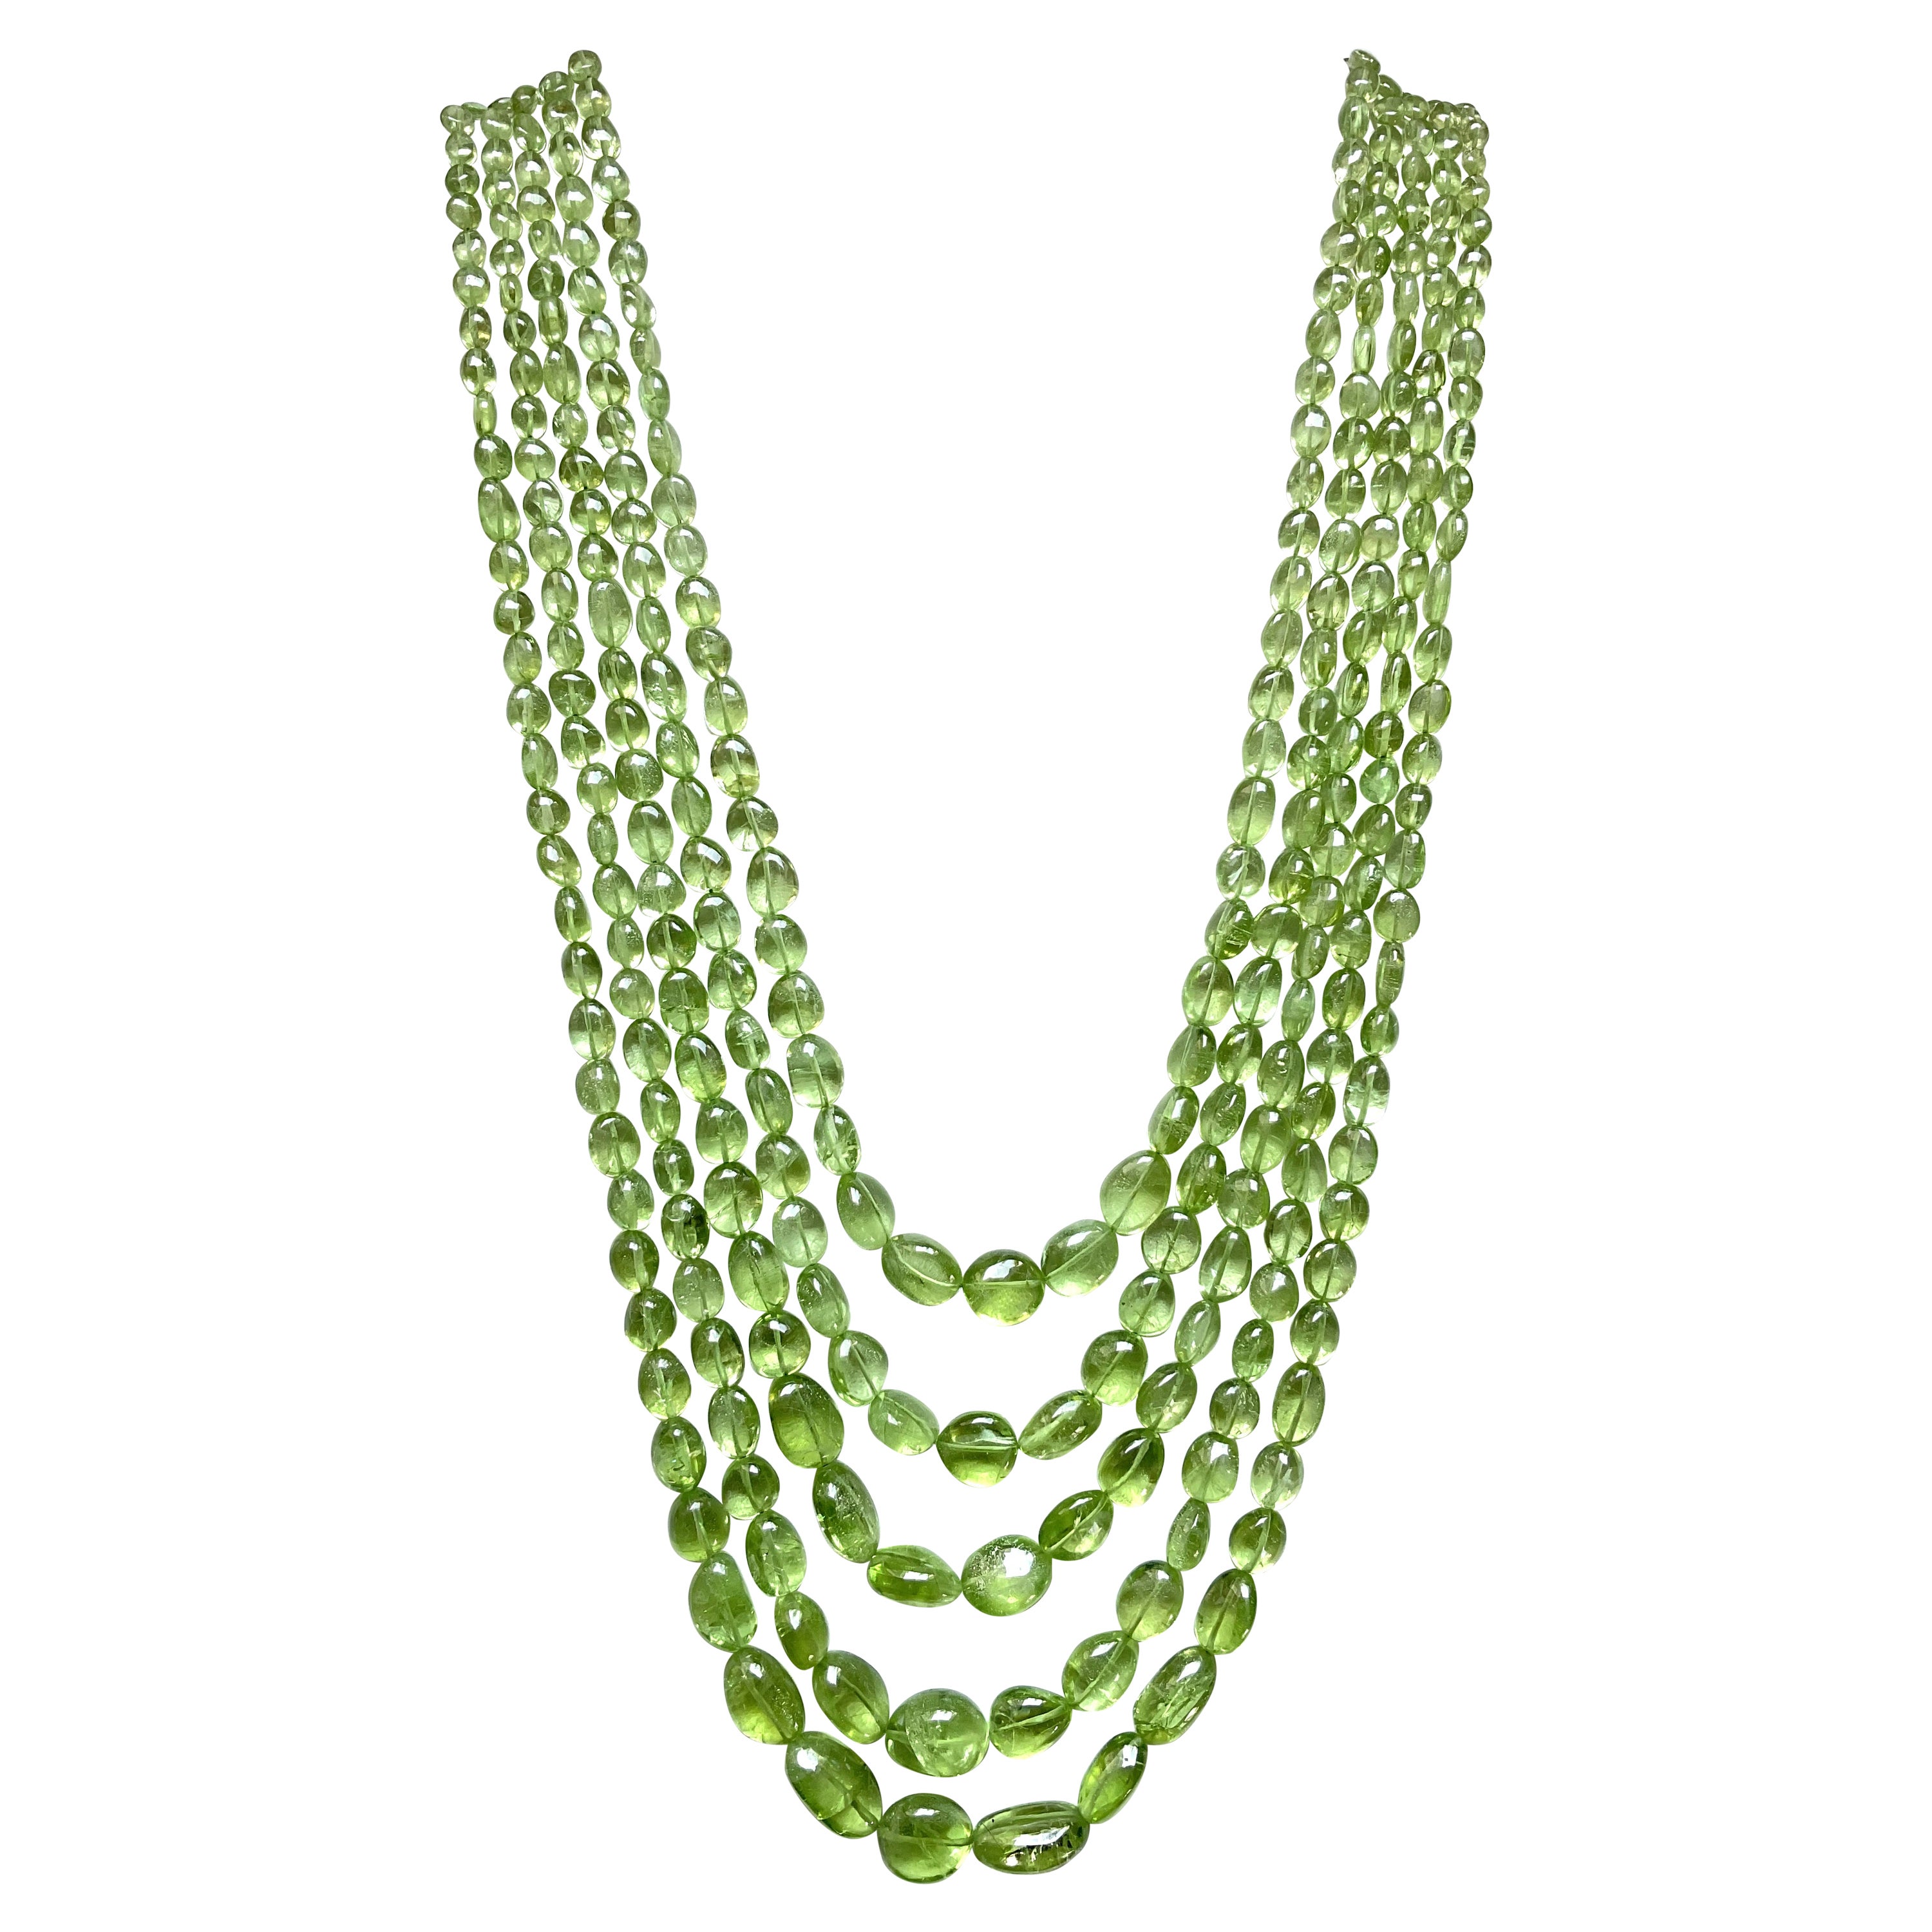 839.05 carats apple green peridot top quality plain tumbled natural necklace gem For Sale